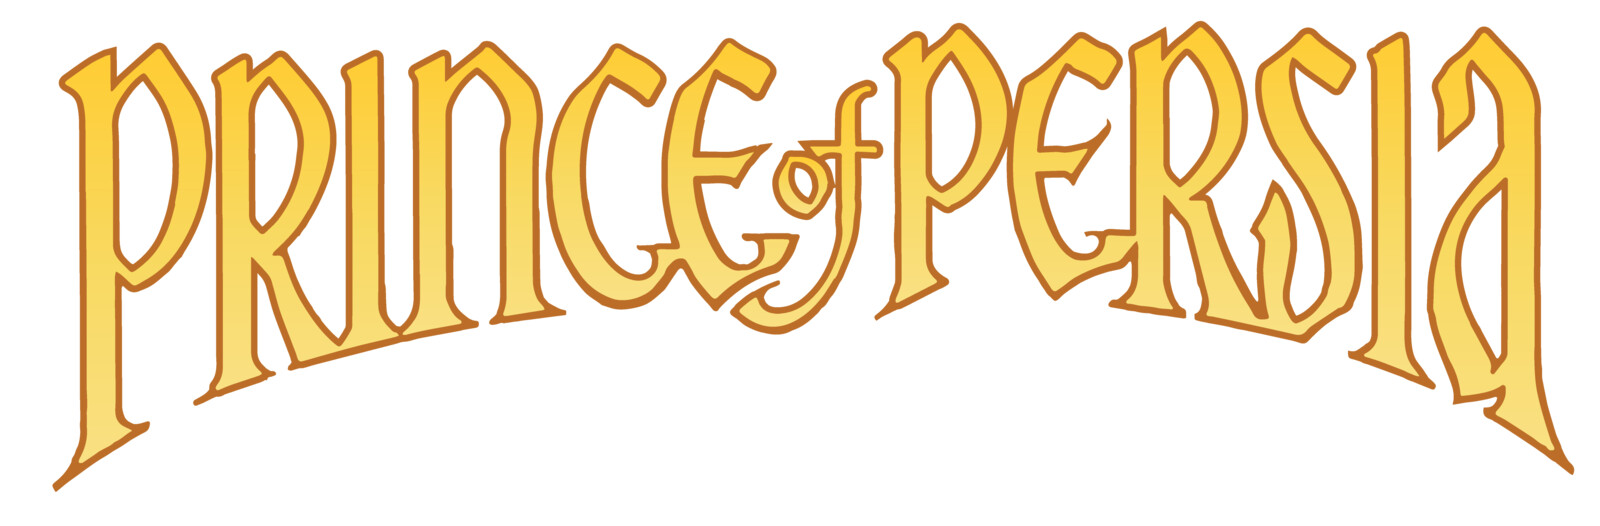 Prince of Persia (Original logo of the cover) (retouched)